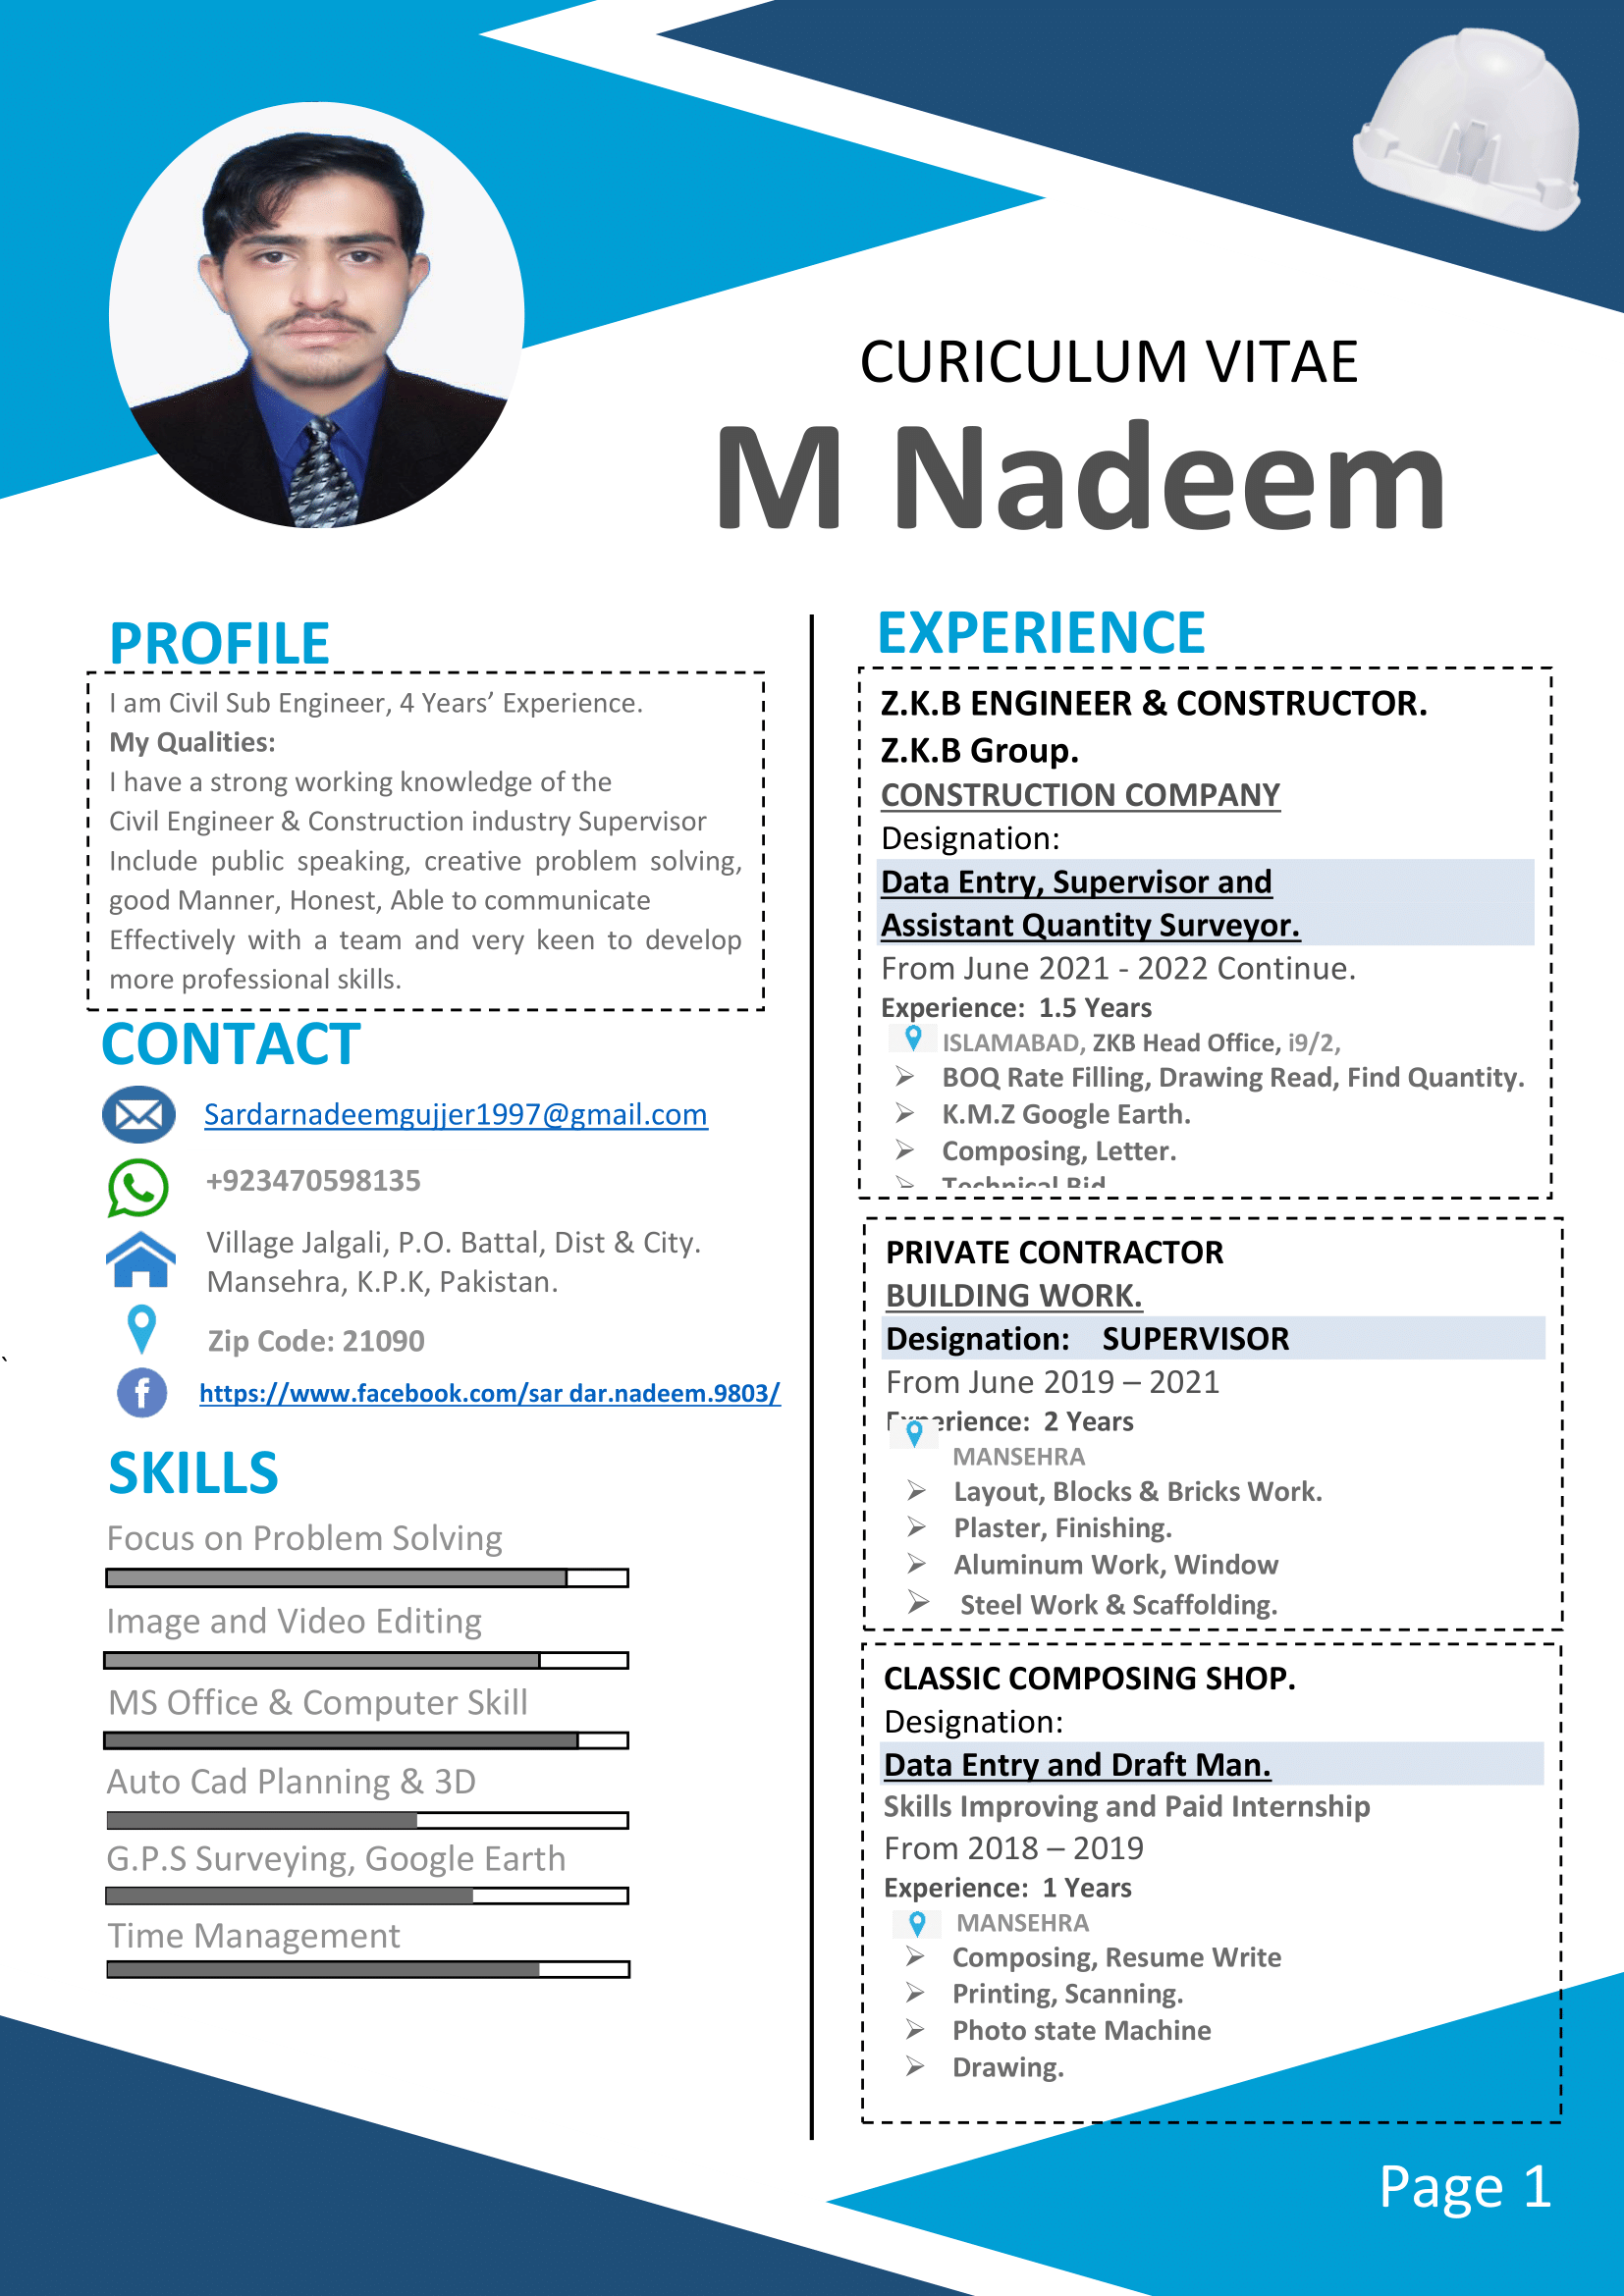 CURICULUM VITAE

M Nadeem

PROFILE EXPERIENCE

I'am Civil Sub Engineer, 4 Years’ Experience.

My Qualities:

I have a strong working knowledge of the

Civil Engineer & Construction industry Supervisor
Include public speaking, creative problem solving,
good Manner, Honest, Able to communicate
Effectively with a team and very keen to develop

Z.K.B ENGINEER & CONSTRUCTOR.
' Z.K.B Group. ‘
i CONSTRUCTION COMPANY
Designation: !
' Data Entry, Supervisor and ,
1 Assistant Quantity Surveyor.
|
I 1
i
' 1
' 1
1 1
|
I 1

From June 2021 - 2022 Continue.
Experience: 1.5 Years
9 ISLAMABAD, ZKB Head Office, i9/2,

more professional skills.

» BOQ Rate Filling, Drawing Read, Find Quantity.
SD Sardarnadeemguijjer1997 @gmail.com » K.M.Z Google Earth.

» Composing, Letter.
+923470598135

 

PRIVATE CONTRACTOR
BUILDING WORK.
Designation: SUPERVISOR
From June 2019 - 2021

1

1

Mansehra, K.P.K, Pakistan. '
1

1

1

|

Mg rience: 2 Years '
1

1

1

1

1

1

1

1

1

1

a Village Jalgali, P.O. Battal, Dist & City.

Zip Code: 21090
oO https://www.facebook.com/sar dar.nadeem.9803/

SKILLS

Focus on Problem Solving

 

MANSEHRA
» Layout, Blocks & Bricks Work.
» Plaster, Finishing.
» Aluminum Work, Window
» Steel Work & Scaffolding.
i CLASSIC COMPOSING SHOP.
Designation:
, Data Entry and Draft Man.
1 Skills Improving and Paid Internship
i From 2018 - 2019
Experience: 1 Years
1
1
1
|
1
|
1
1
1
1

 

Image and Video Editing

 

MS Office & Computer Skill

Auto Cad Planning & 3D

G.P.S Surveying, Google Earth

Time Management 9 MANSEHRA }
Composing, Resume Write

r
» Printing, Scanning.
~
r

Photo state Machine
Drawing.